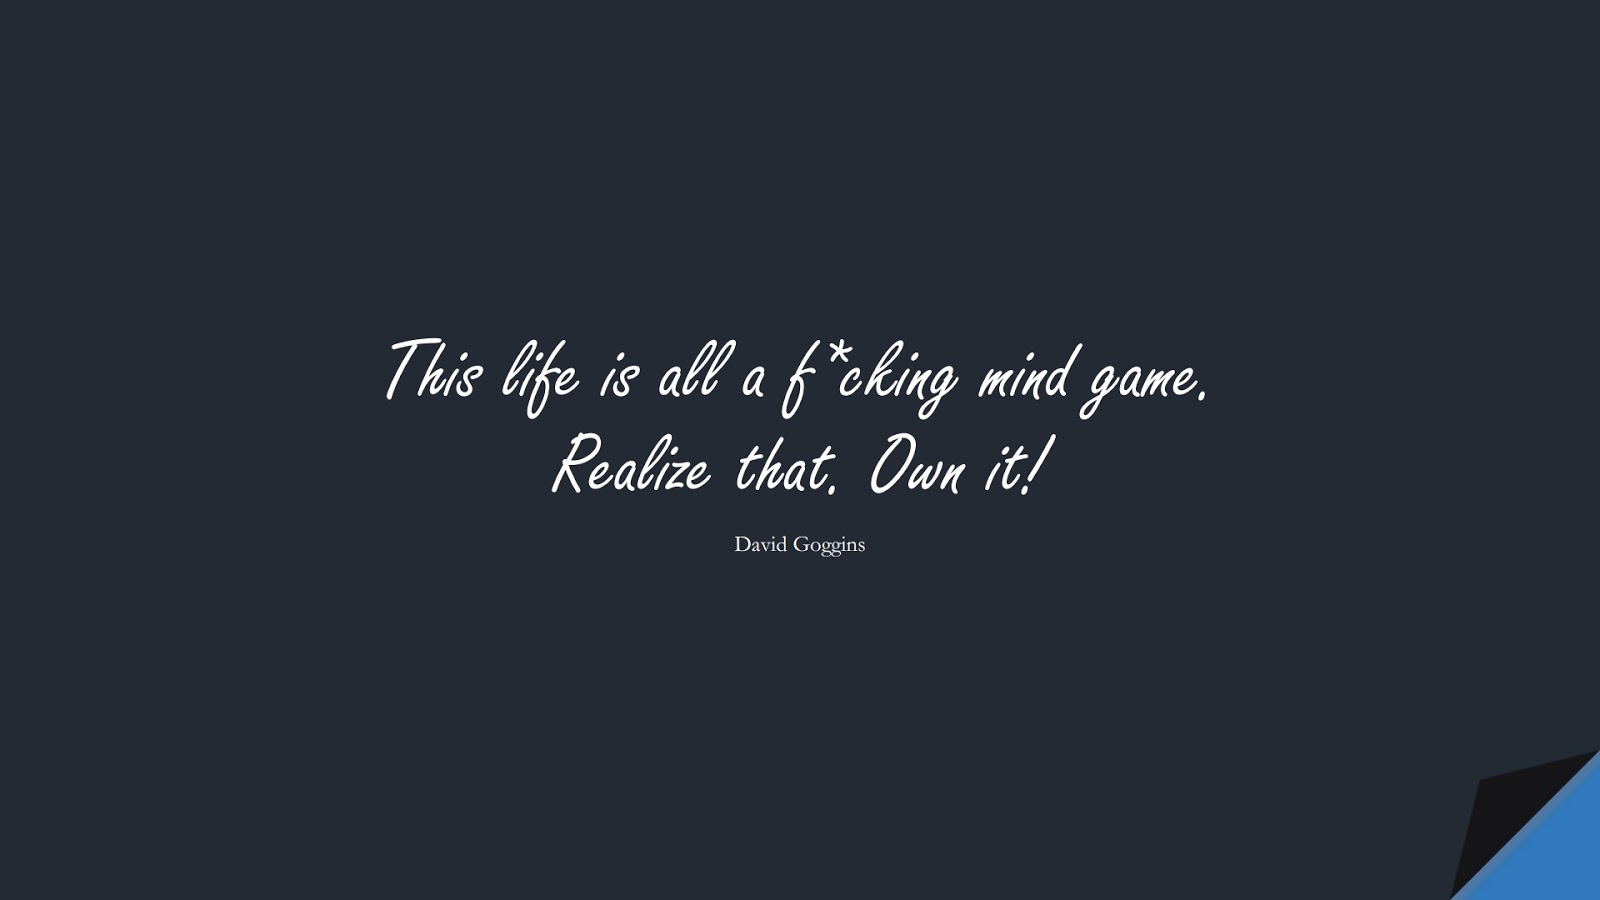 This life is all a f*cking mind game. Realize that. Own it! (David Goggins);  #BeingStrongQuotes